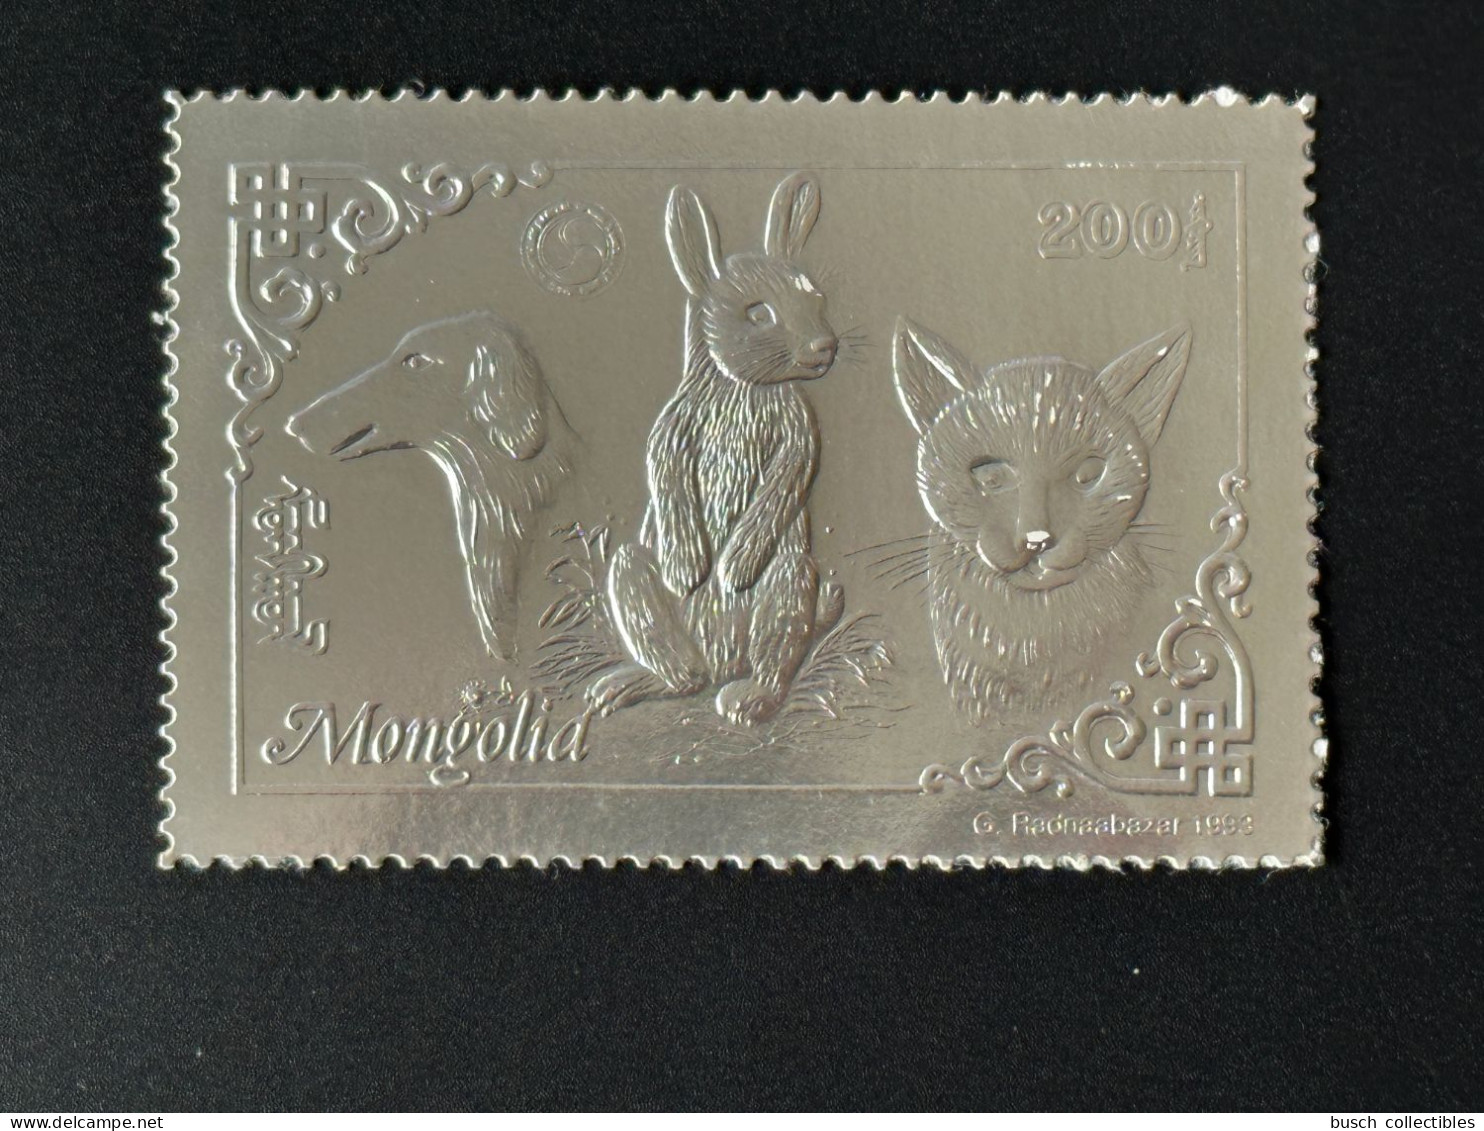 Mongolie Mongolia 1993 Mi. 2474 A Silver Argent Rotary Lions Chien Hund Dog Katze Cat Chat Lapin Rabbit Hase - Gatti